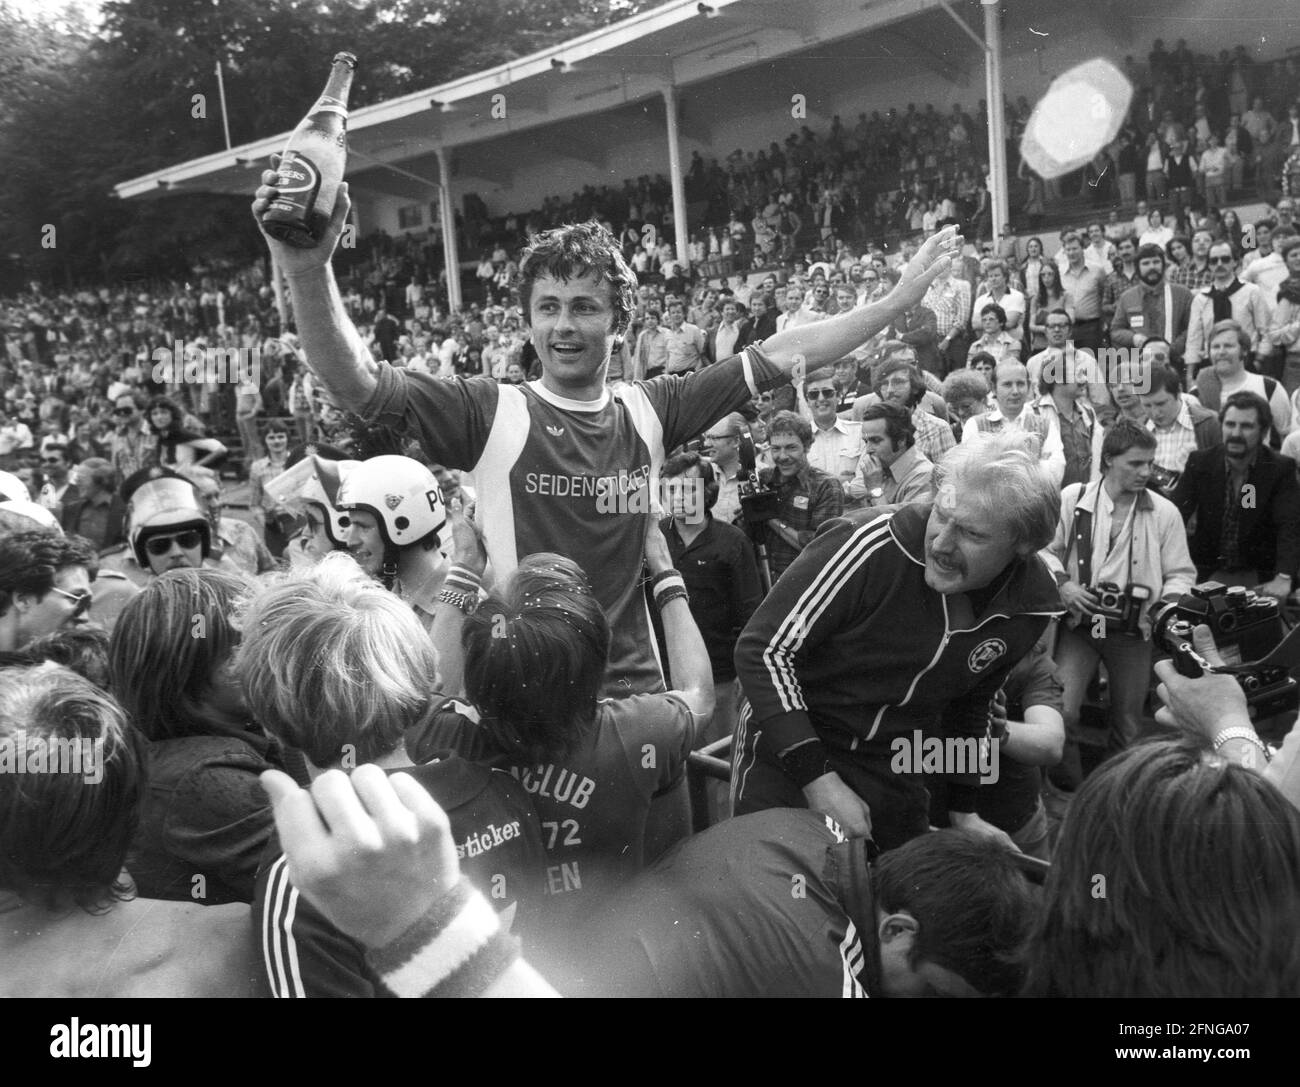 DSC Arminia Bielefeld promoted to the first Bundesliga after 2:0 victory over Fortuna Köln on 27.05.1978. Final cheer. [automated translation] Stock Photo